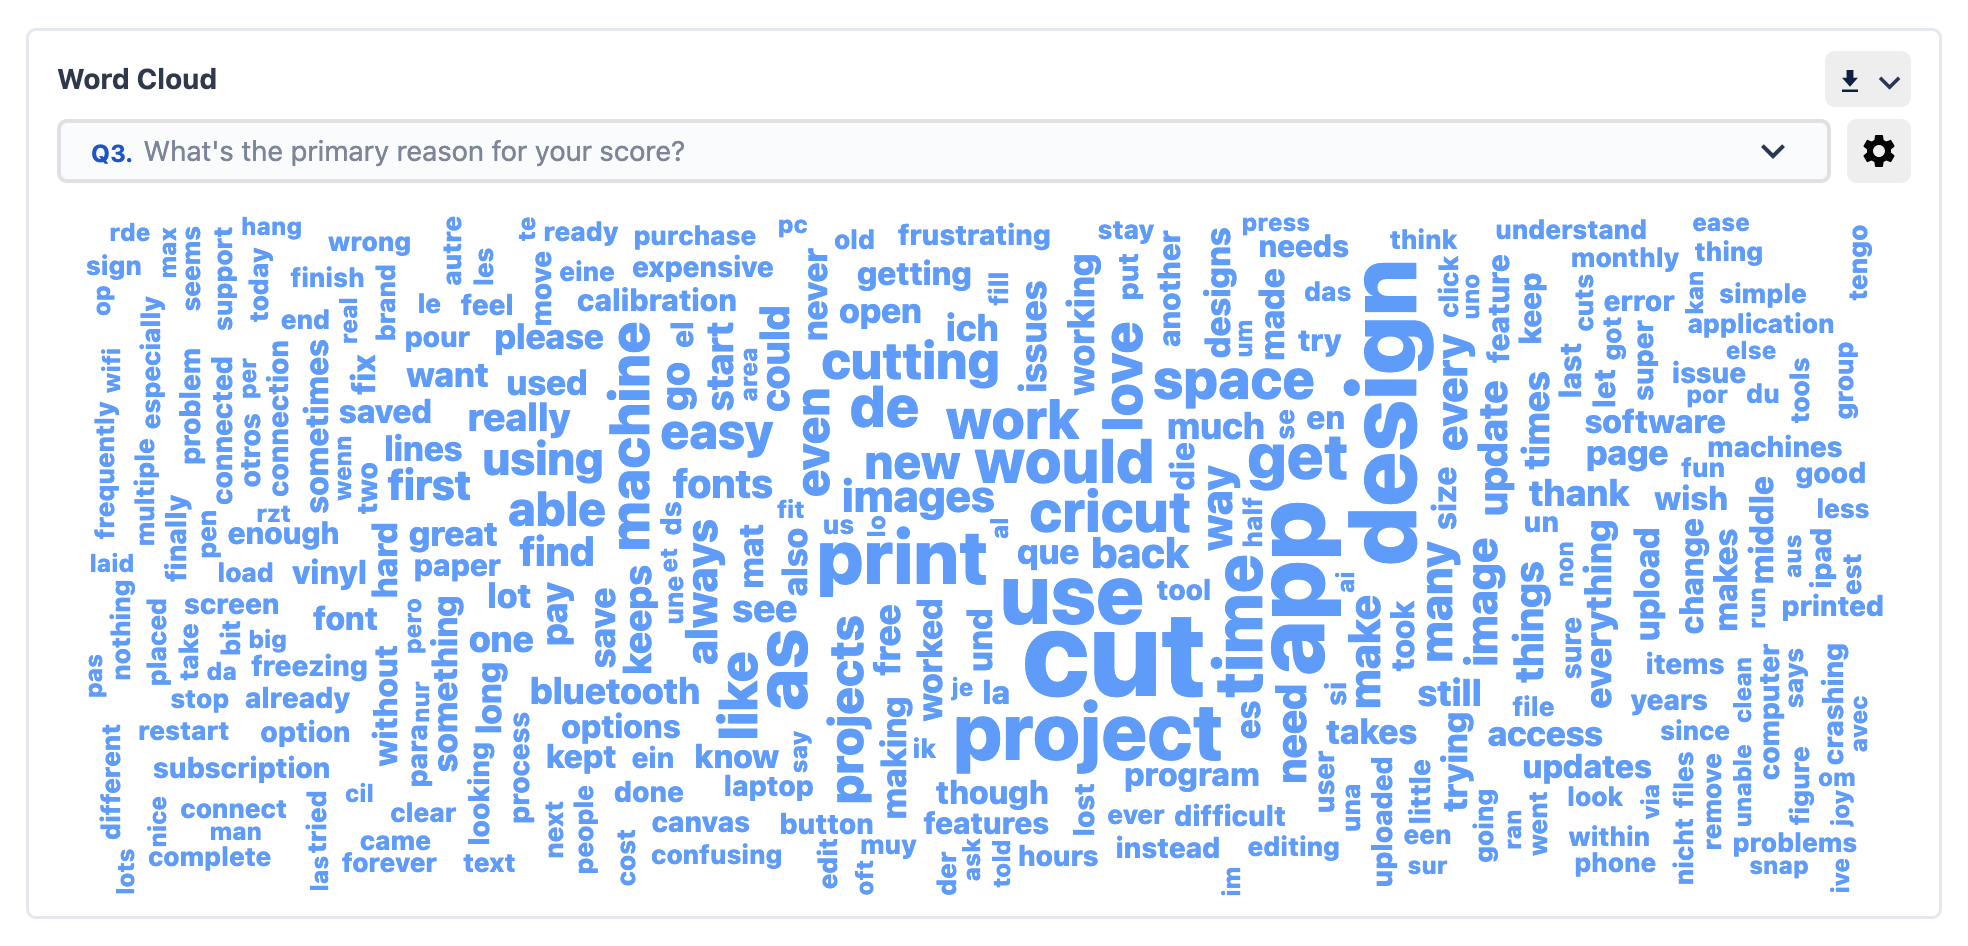  The image shows a word cloud created by SurveySensum to provide an overview of the NPS responses collected. 